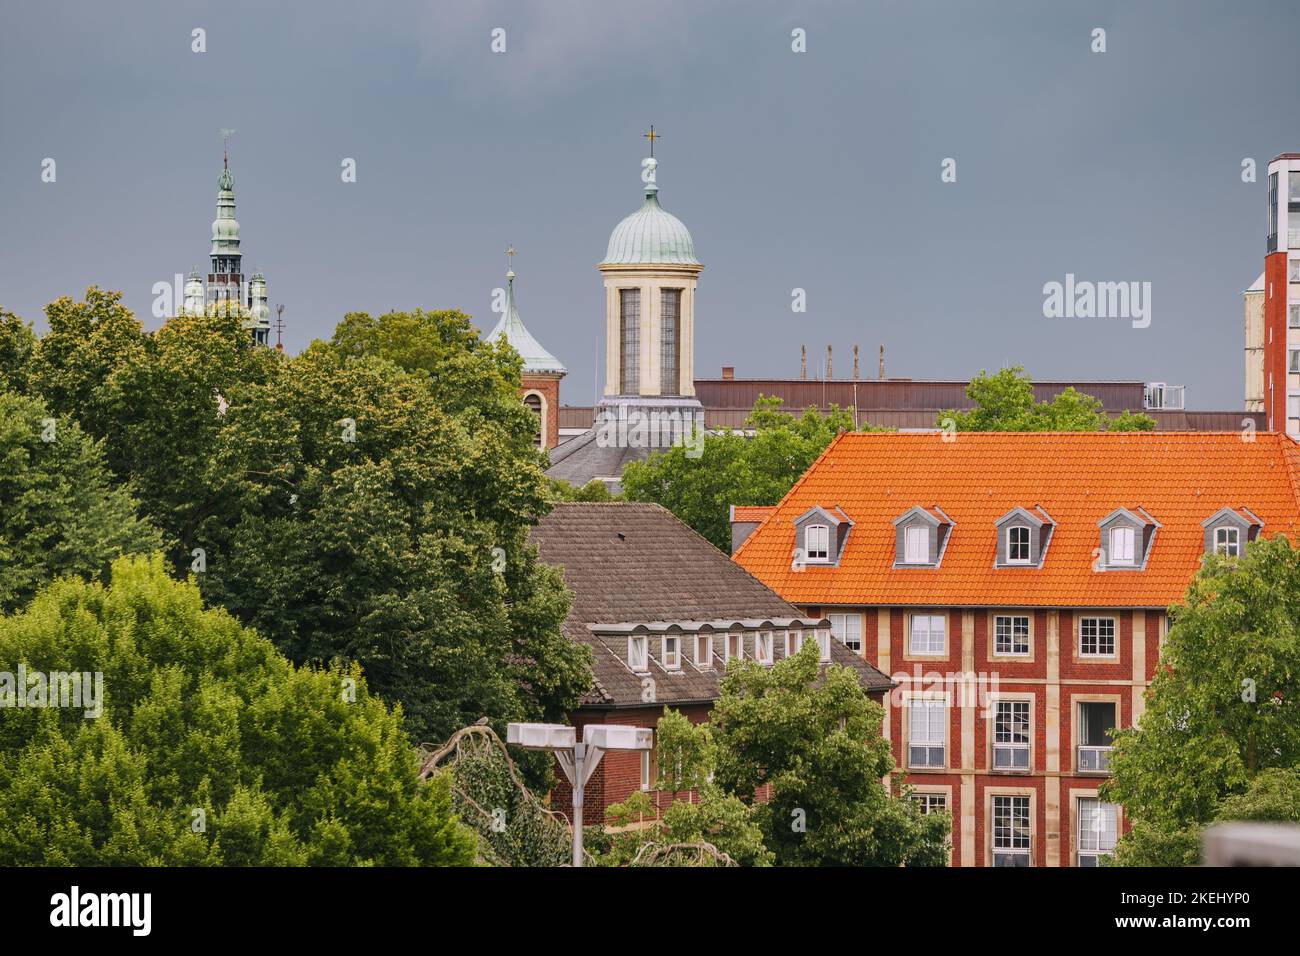 View of the orange roofs of the old European city. Tourism and real estate in Munster, Germany concept. Stock Photo